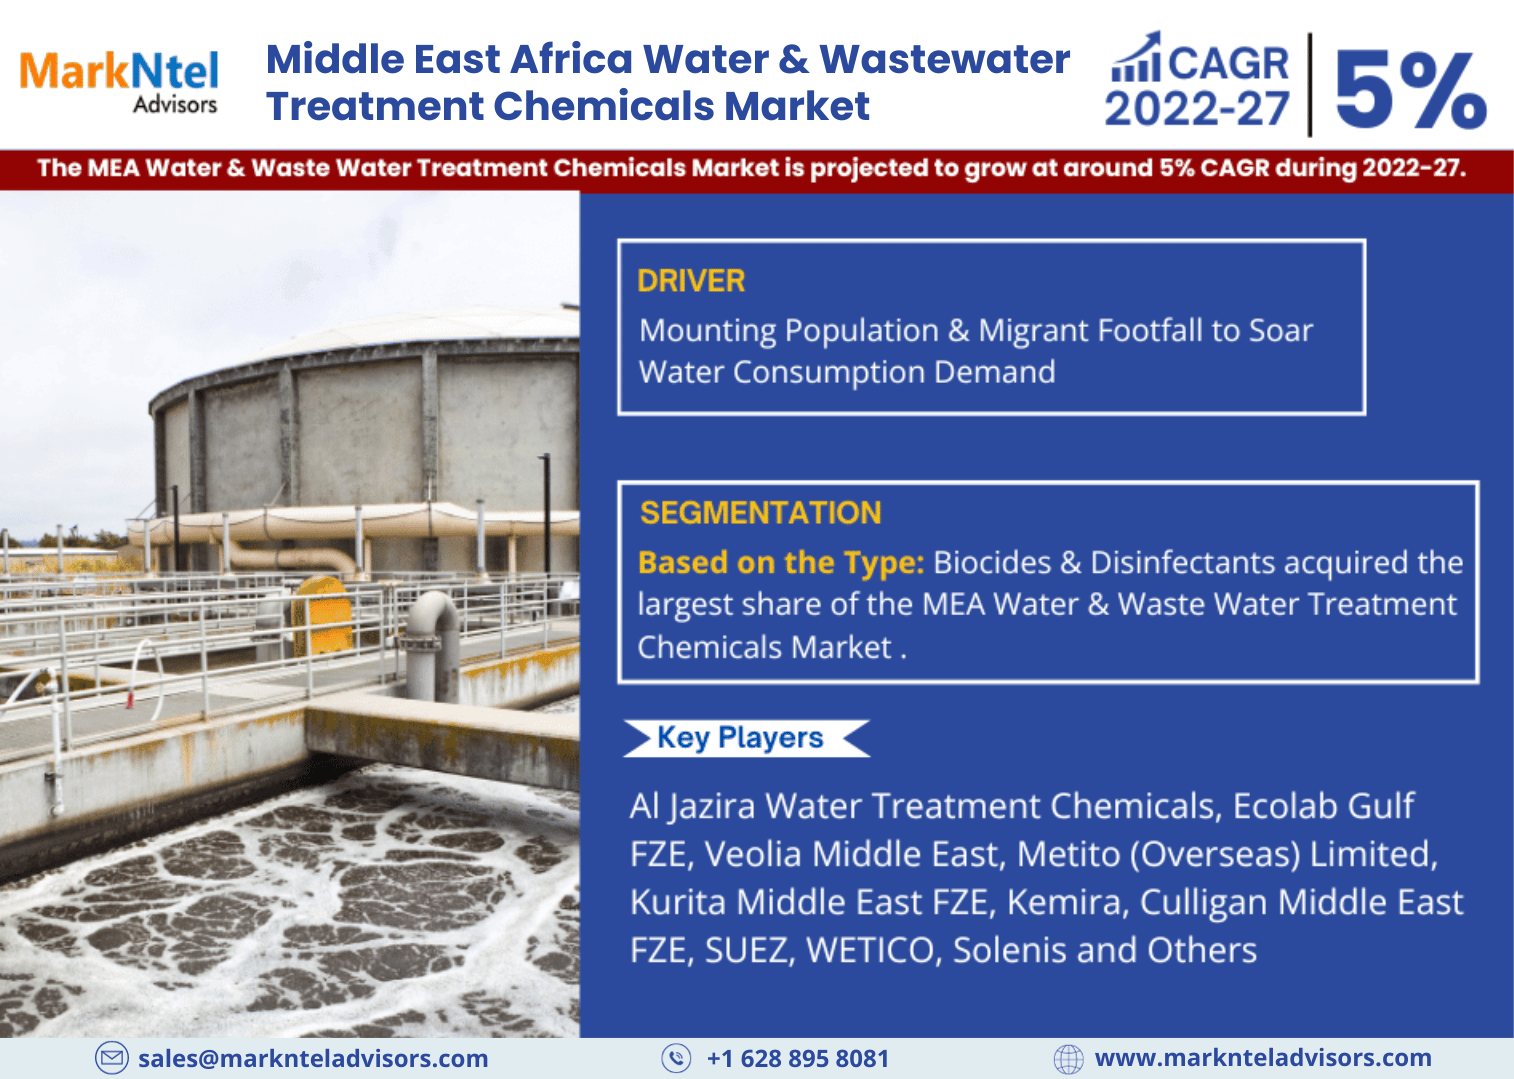 Middle East Africa Water and Wastewater Treatment Chemicals Market